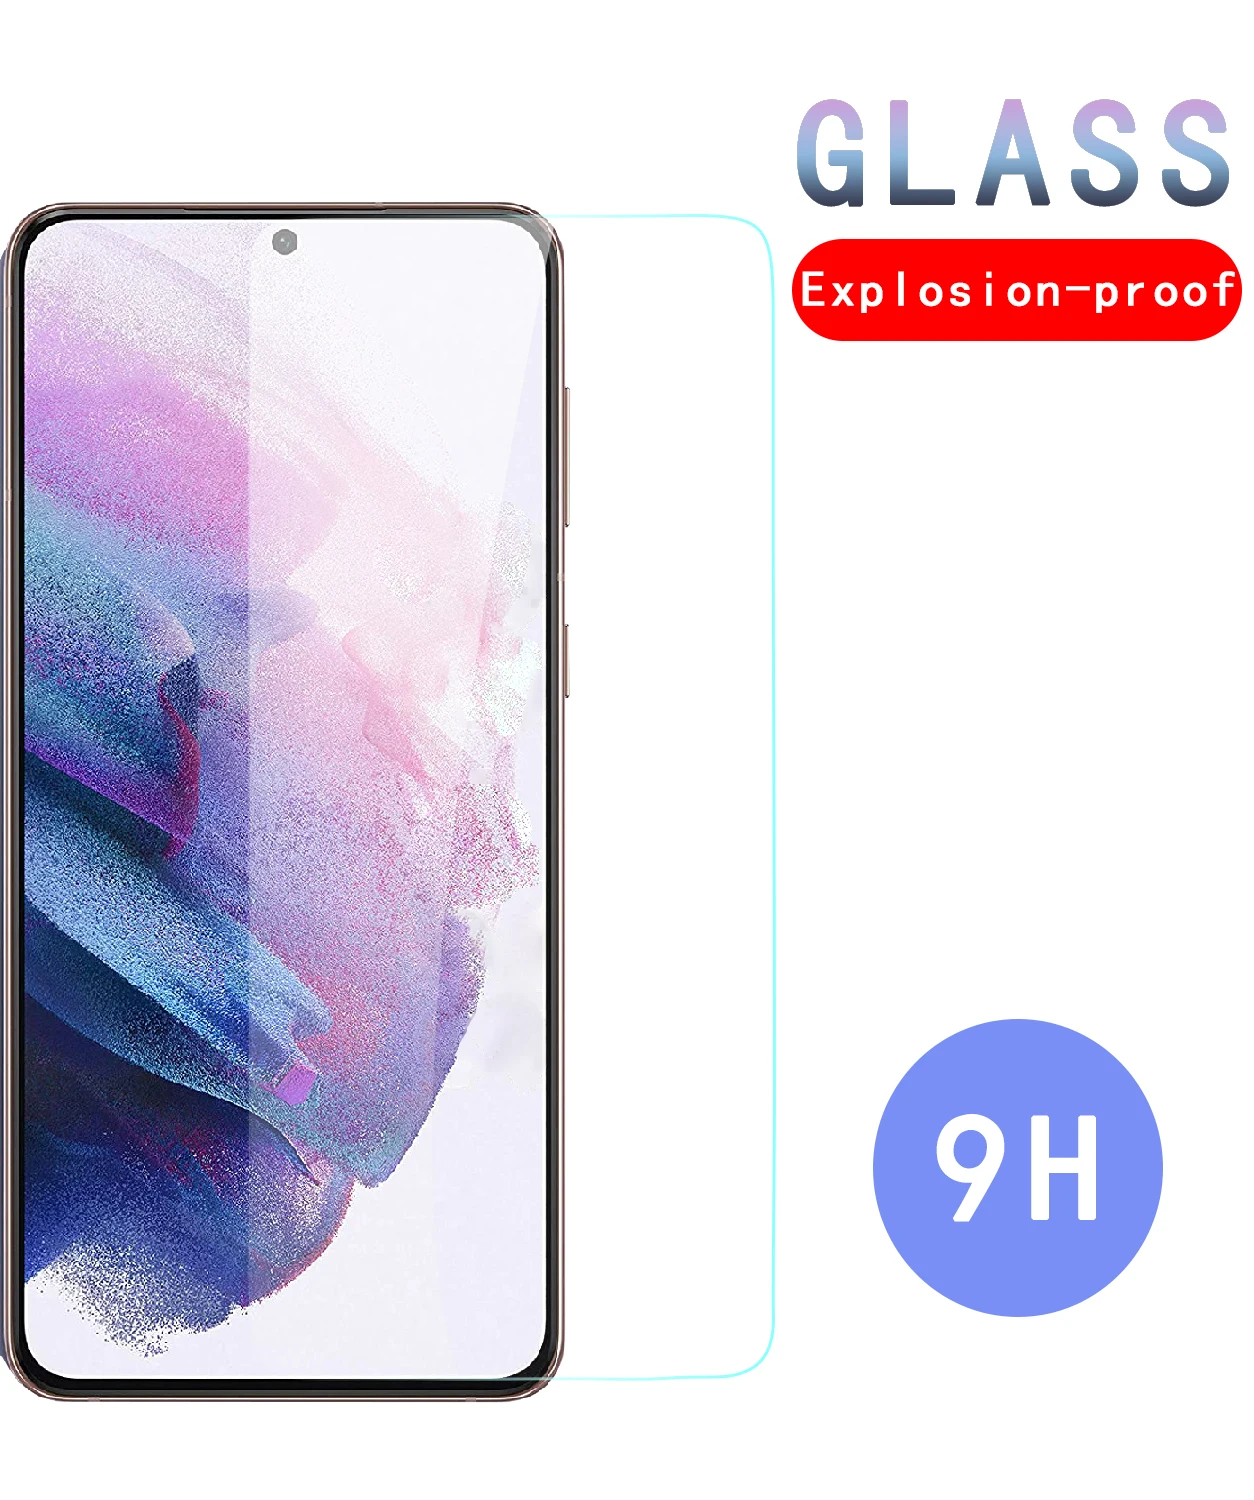 9H Protective Glass For Samsung Galaxy A71 A51 A41 A31 A21S A11 A01 Screen Protector M01 M11 M21 M31 M51 A30 A50 Safety Glass one piece anime case for samsung galaxy a51 a71 5g a quantum a21s a91 m10 a21 a11 a31 a41 m51 m11 silicone phone coque